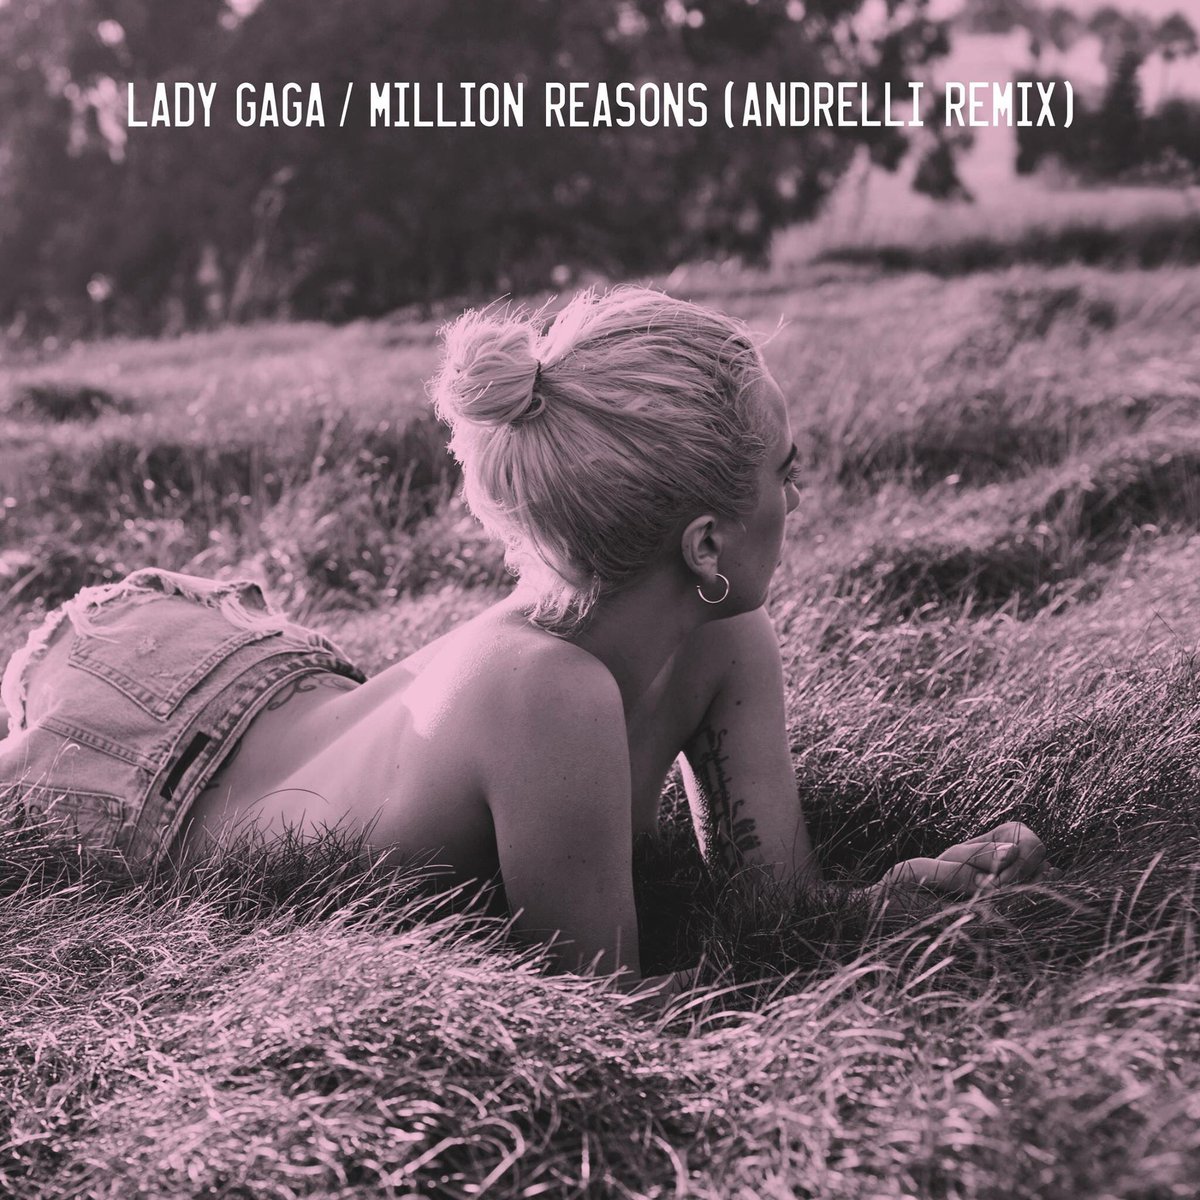 Loving the new official #MillionReasons remix from Andrelli https://t.co/kFZVTq8SmE https://t.co/mvb5abD0PF